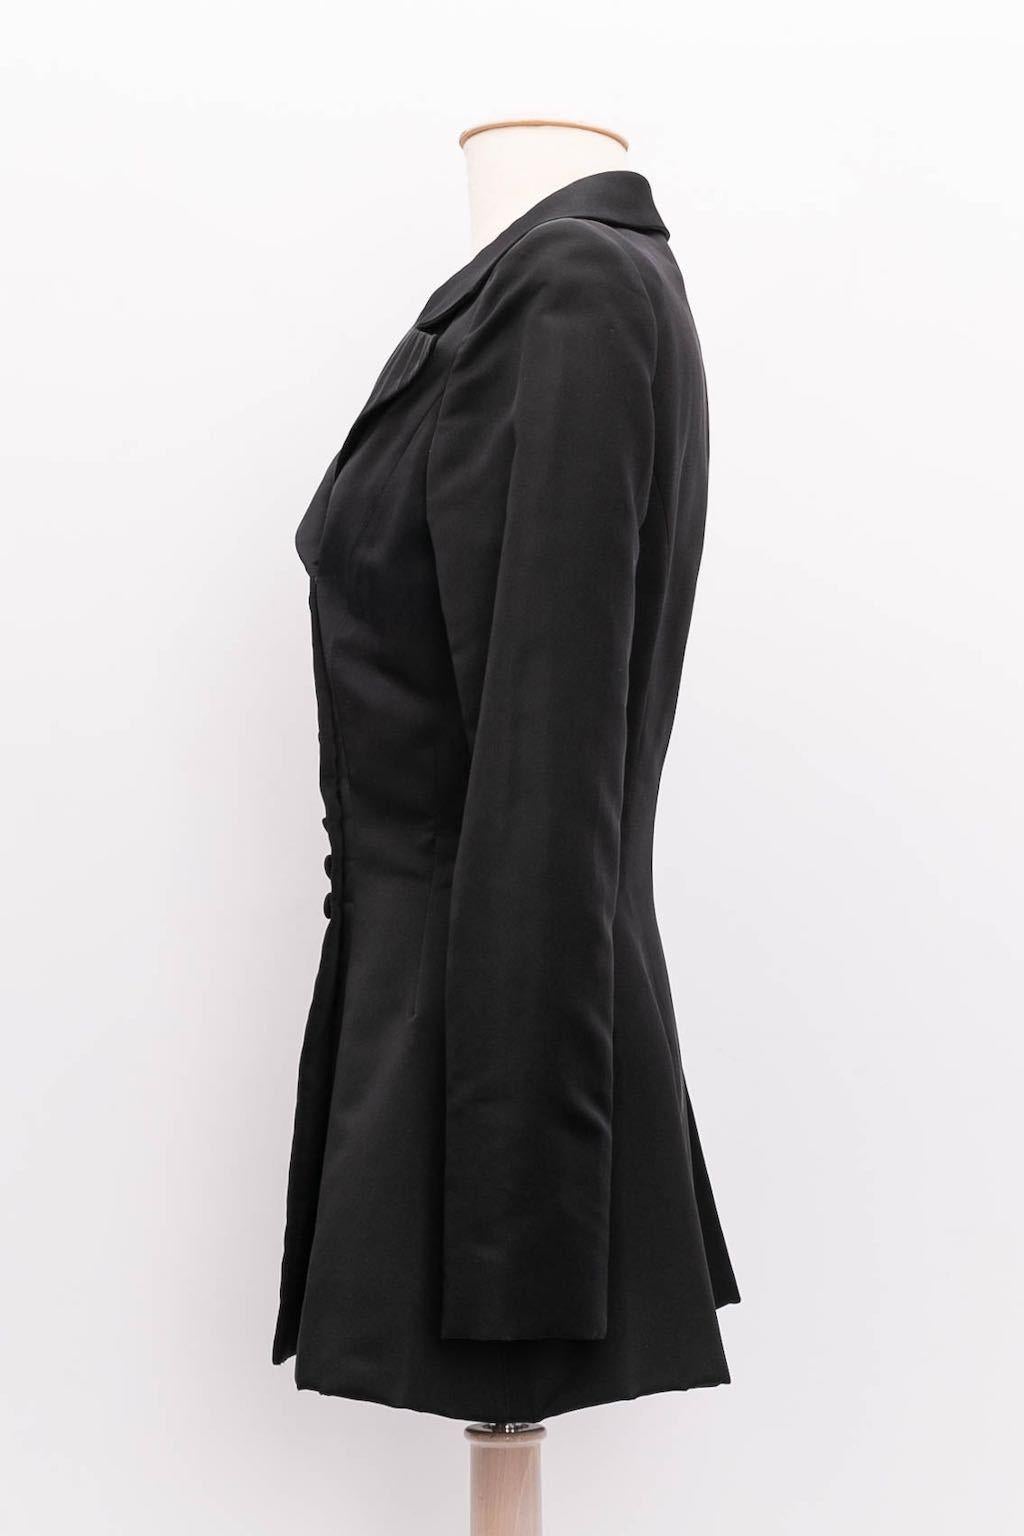 Ted Lapidus Haute Couture - Black satin jacket with five false pockets. No composition or size tag, it fits a size 36FR.

Additional information:
Condition: Very good condition
Dimensions: Shoulders: 42 cm (16.53